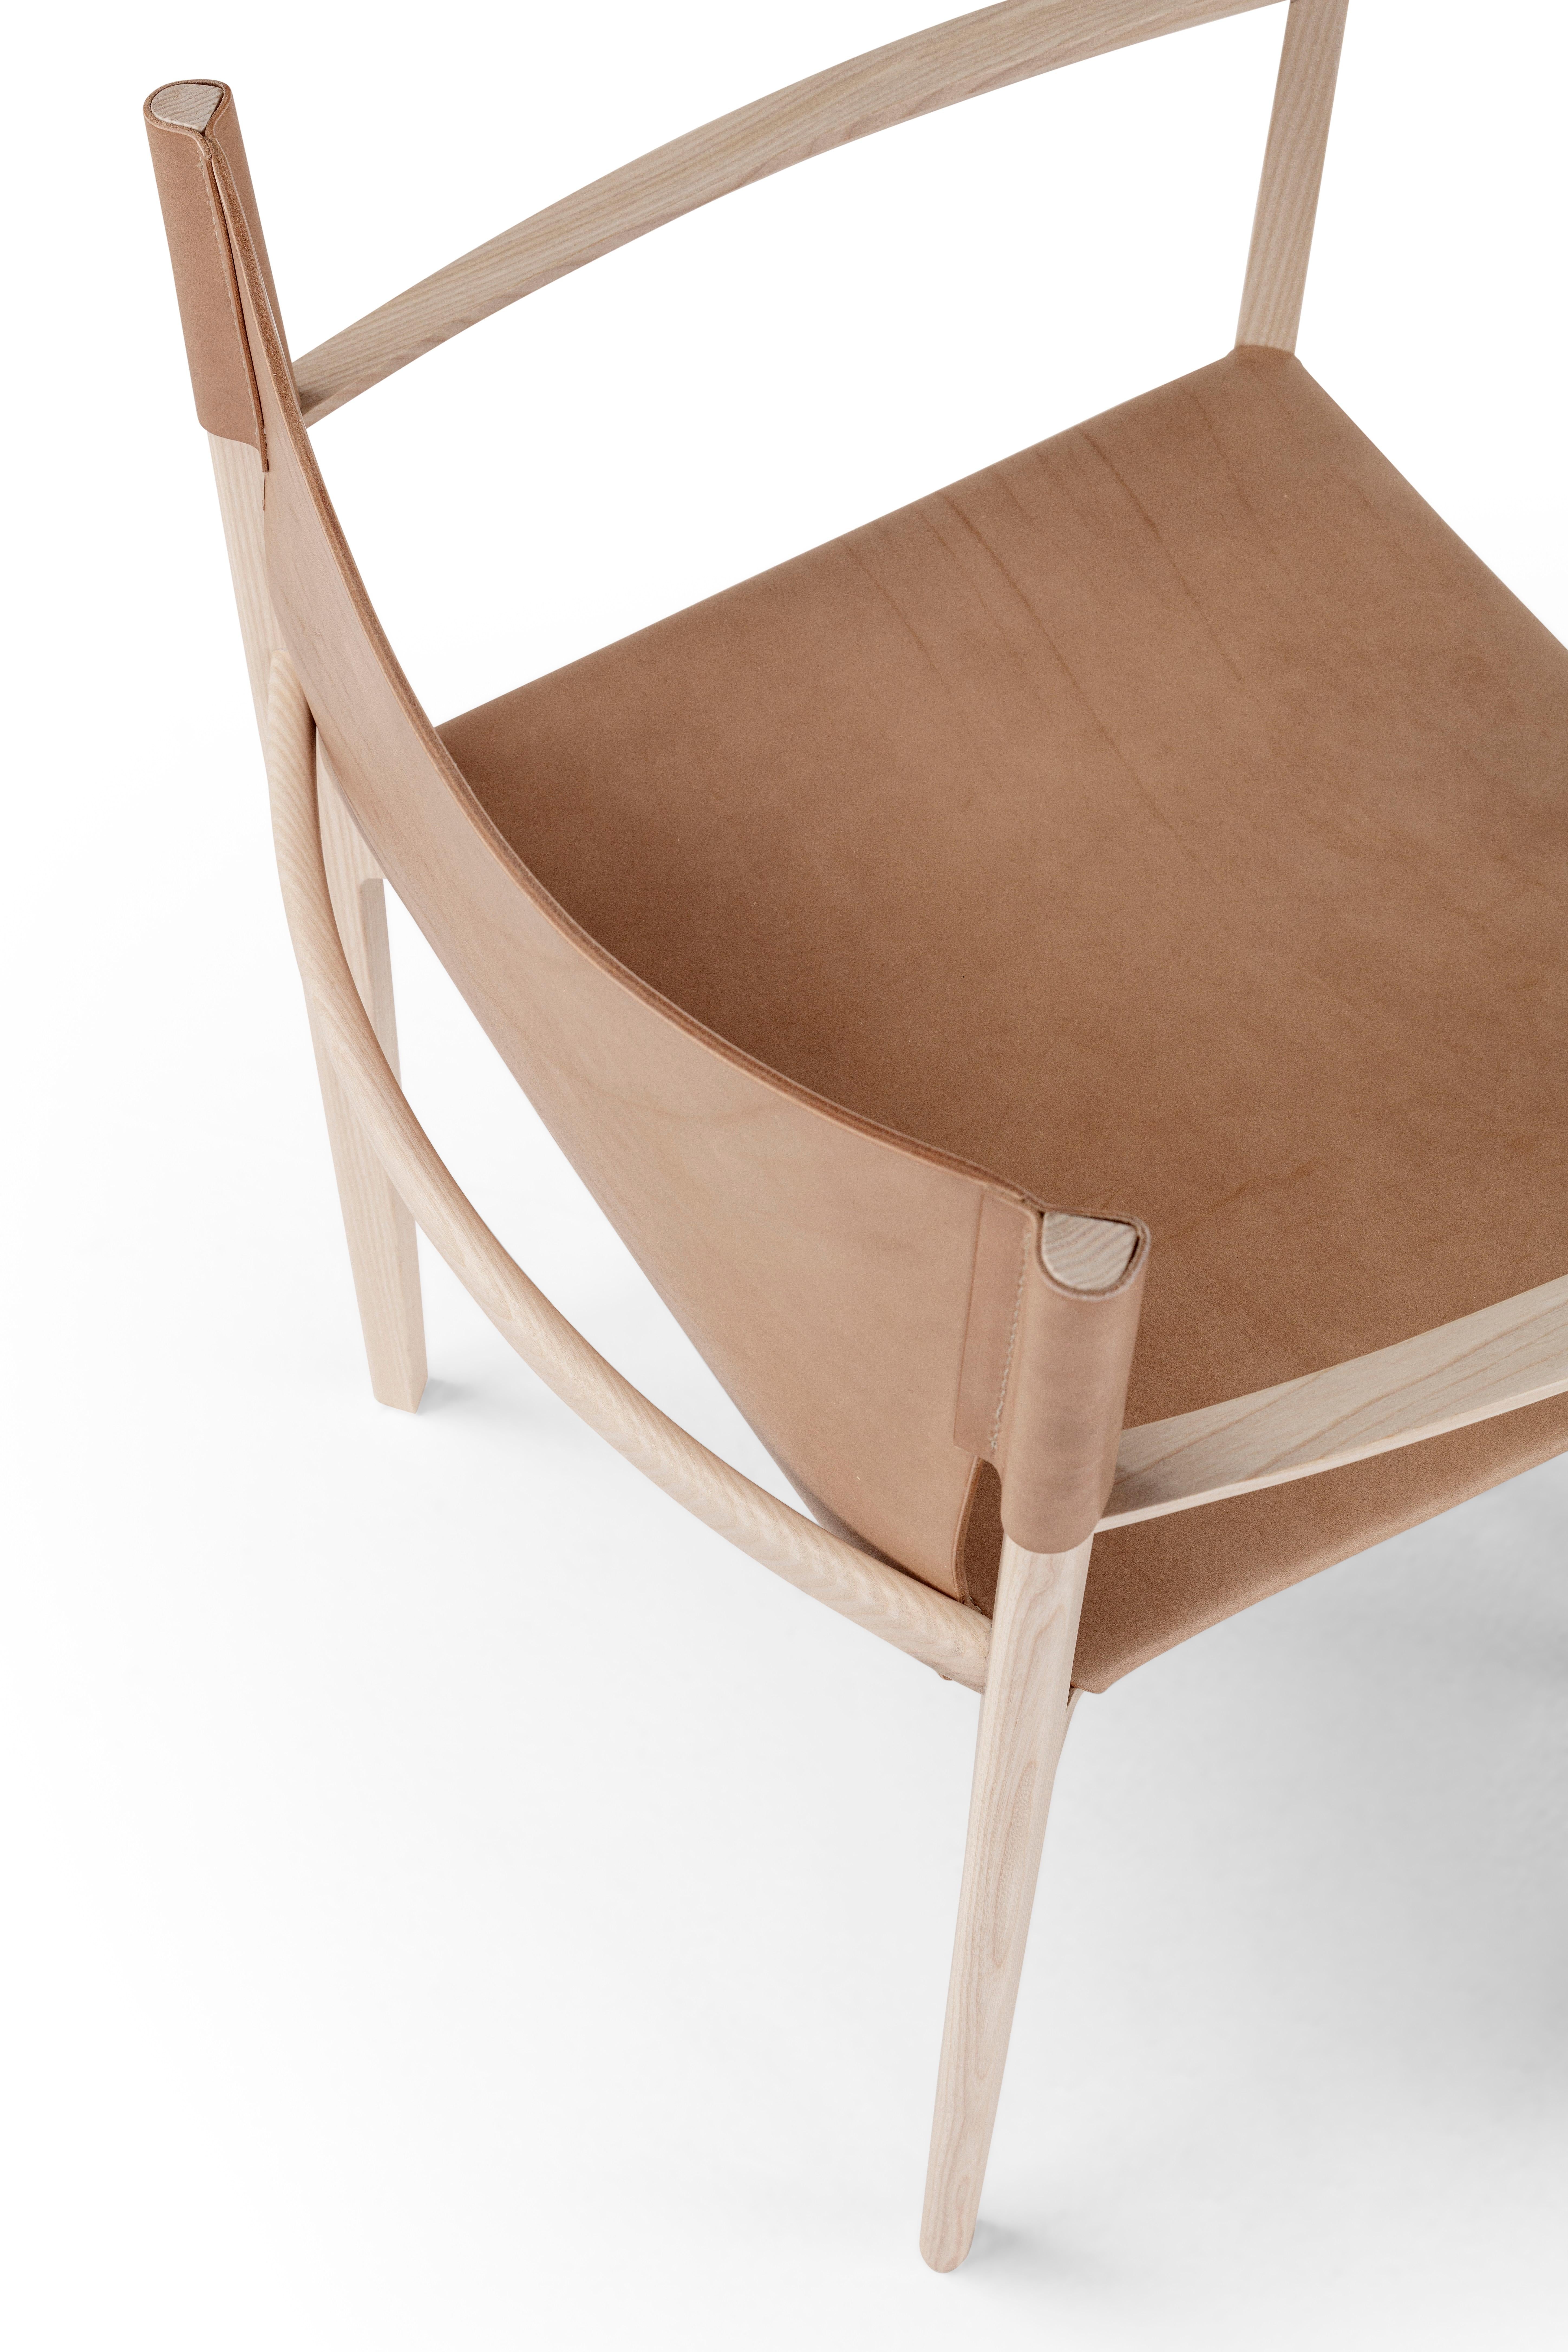 Contemporary Wooden Chair 'Stilt', Cuoio For Sale 2